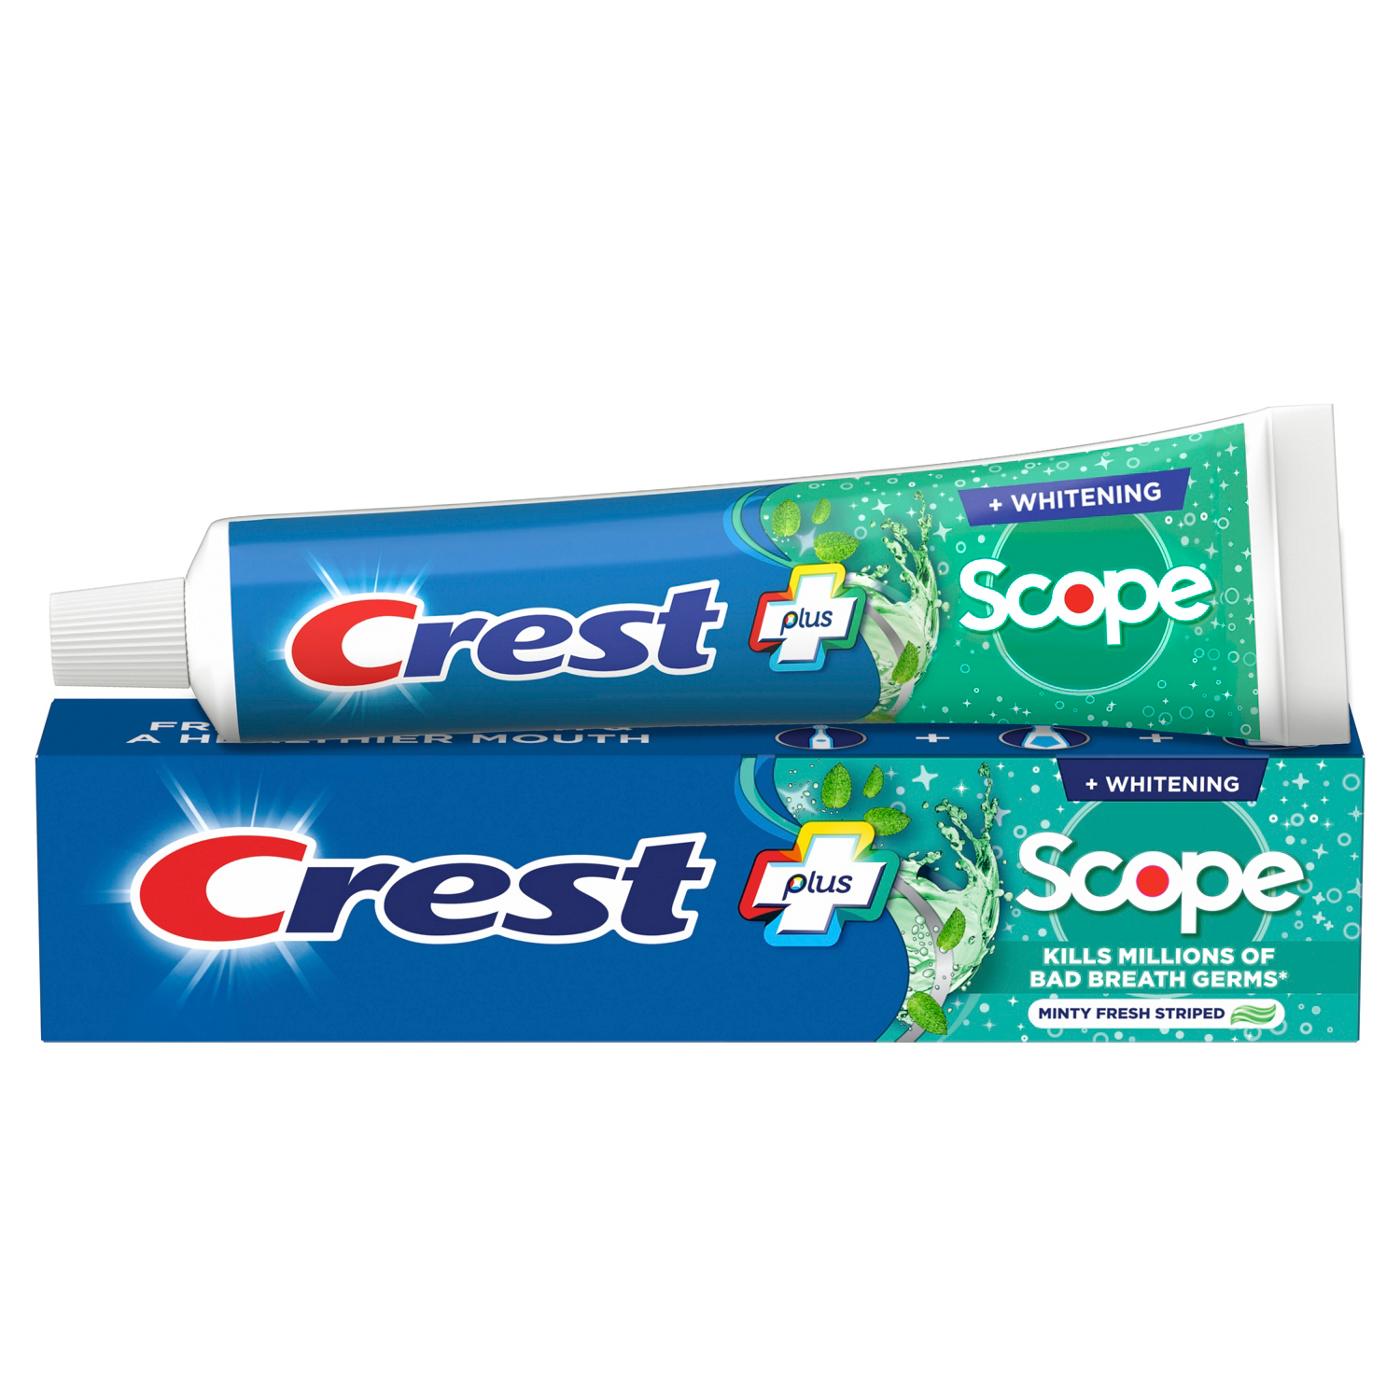 Crest Complete + Scope Whitening Toothpaste - Minty Fresh Striped; image 2 of 10